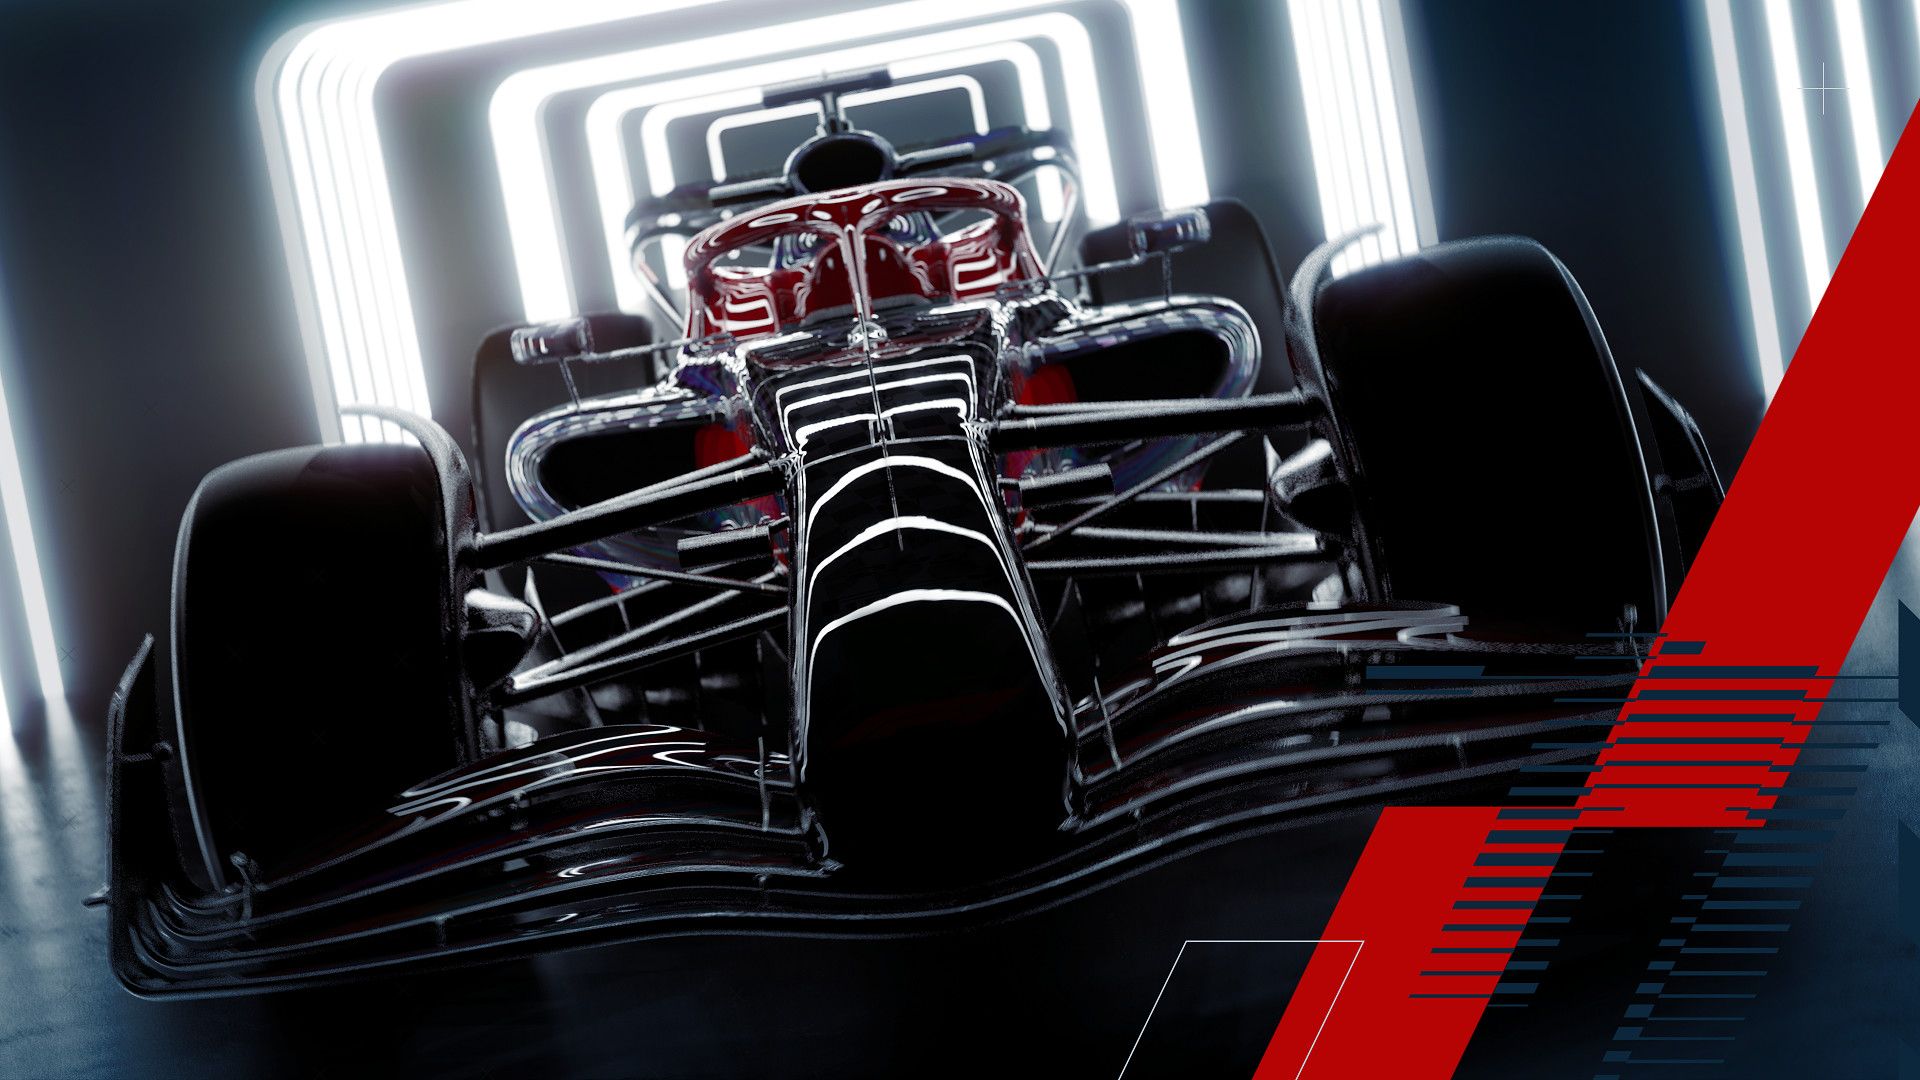 F1 2022 will reportedly include supercars and cross-play